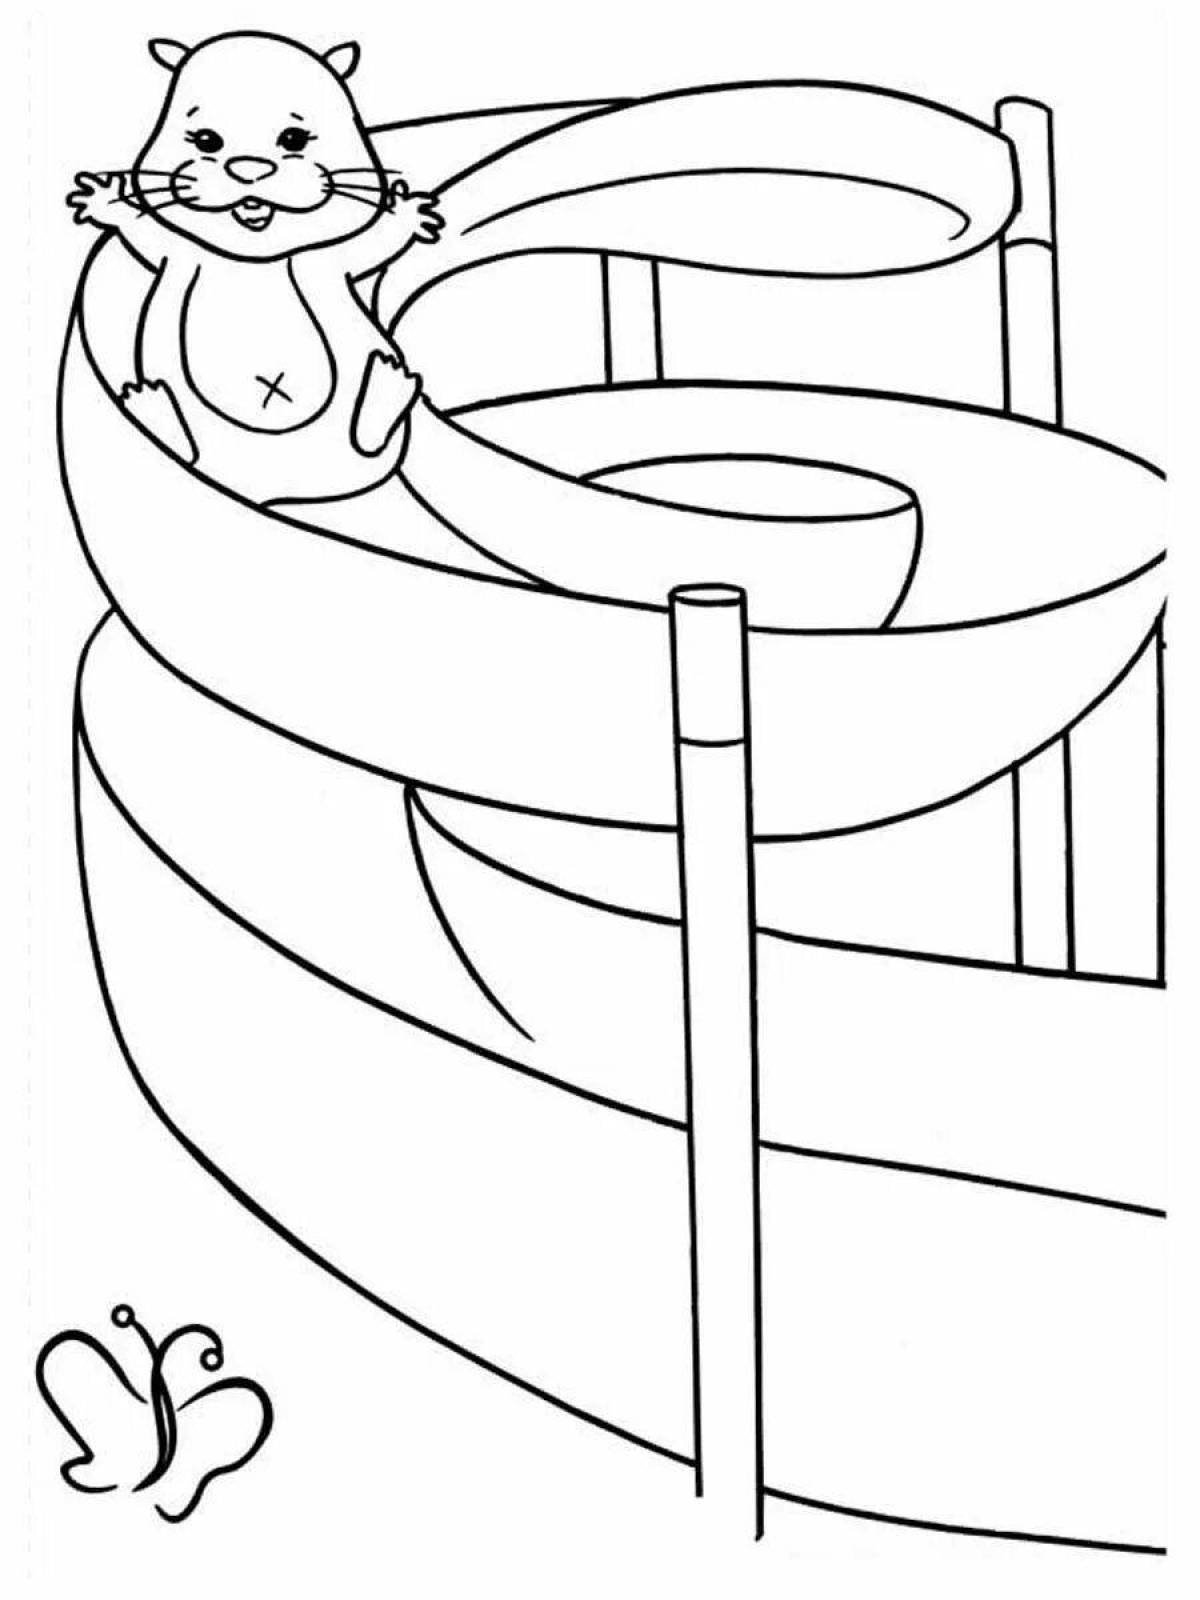 Coloring page fluffy hamster in a cage